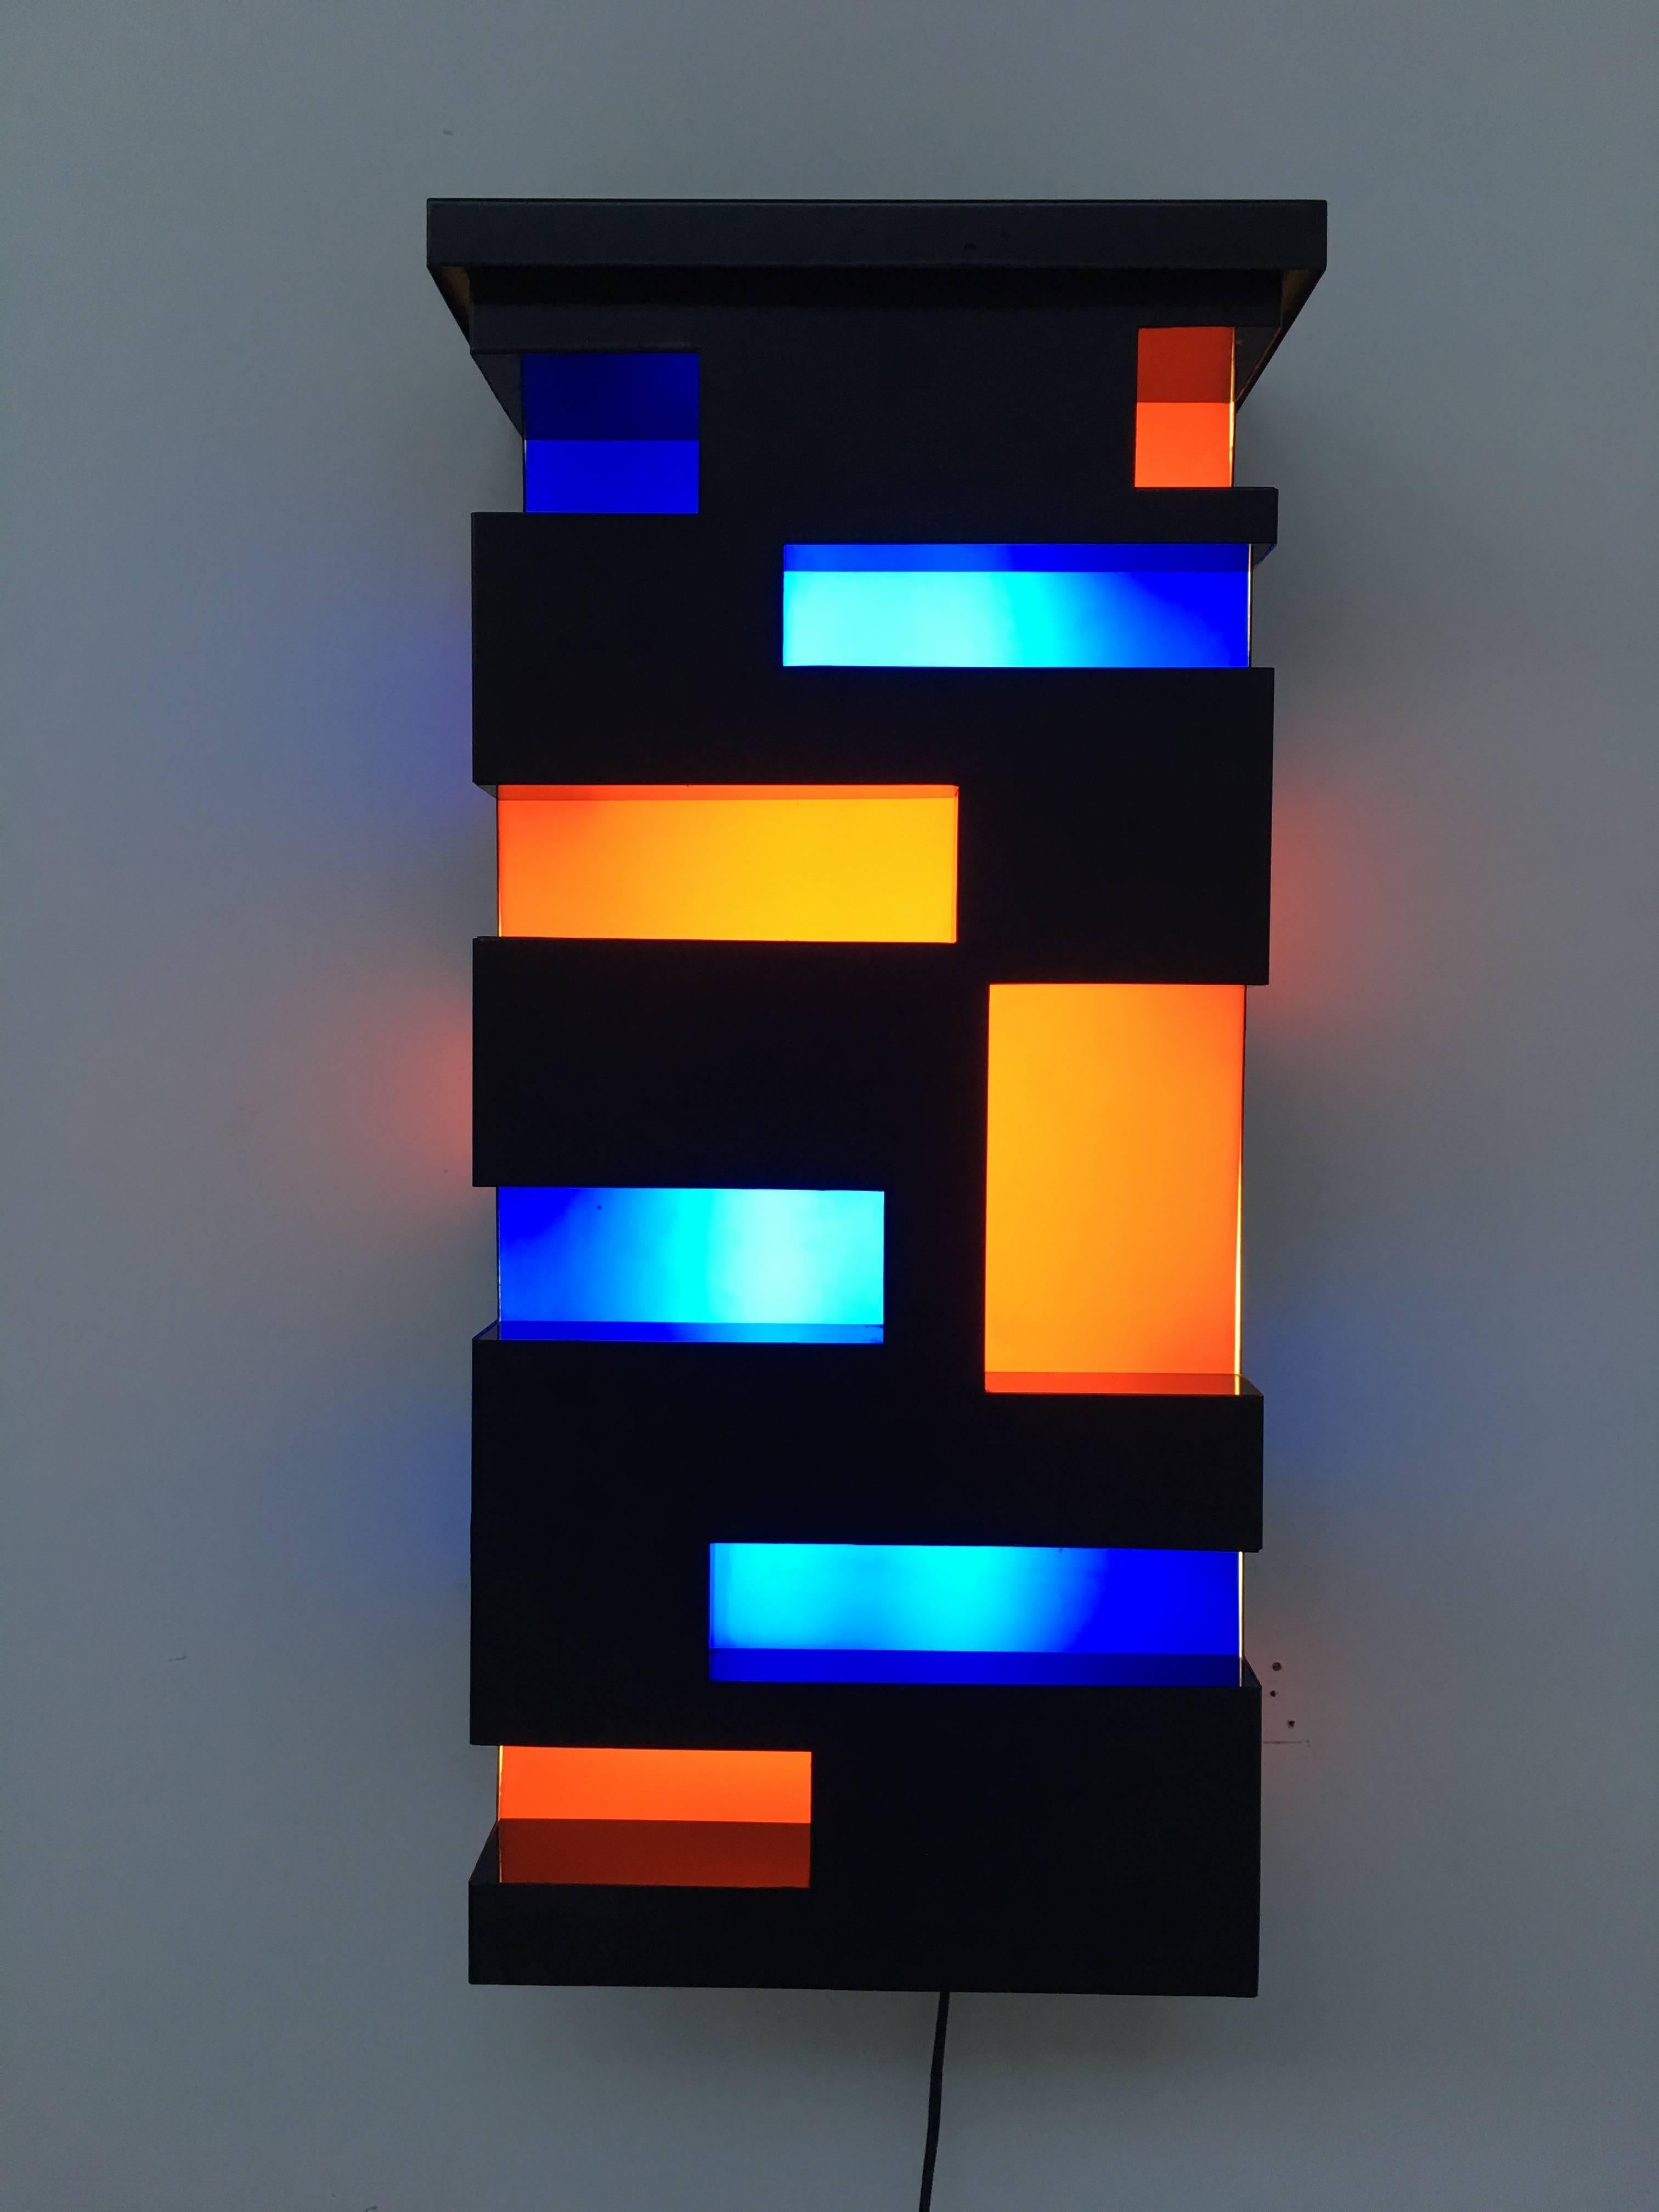 Beautiful large-scale Italian light sculpture dating from the 1970s clearly reflecting the influence of the Dutch 'De Stijl' movement and very much in the style of the work of the 'De Stijl' artists Georges Vantongerloo, Theo van Doesburg and